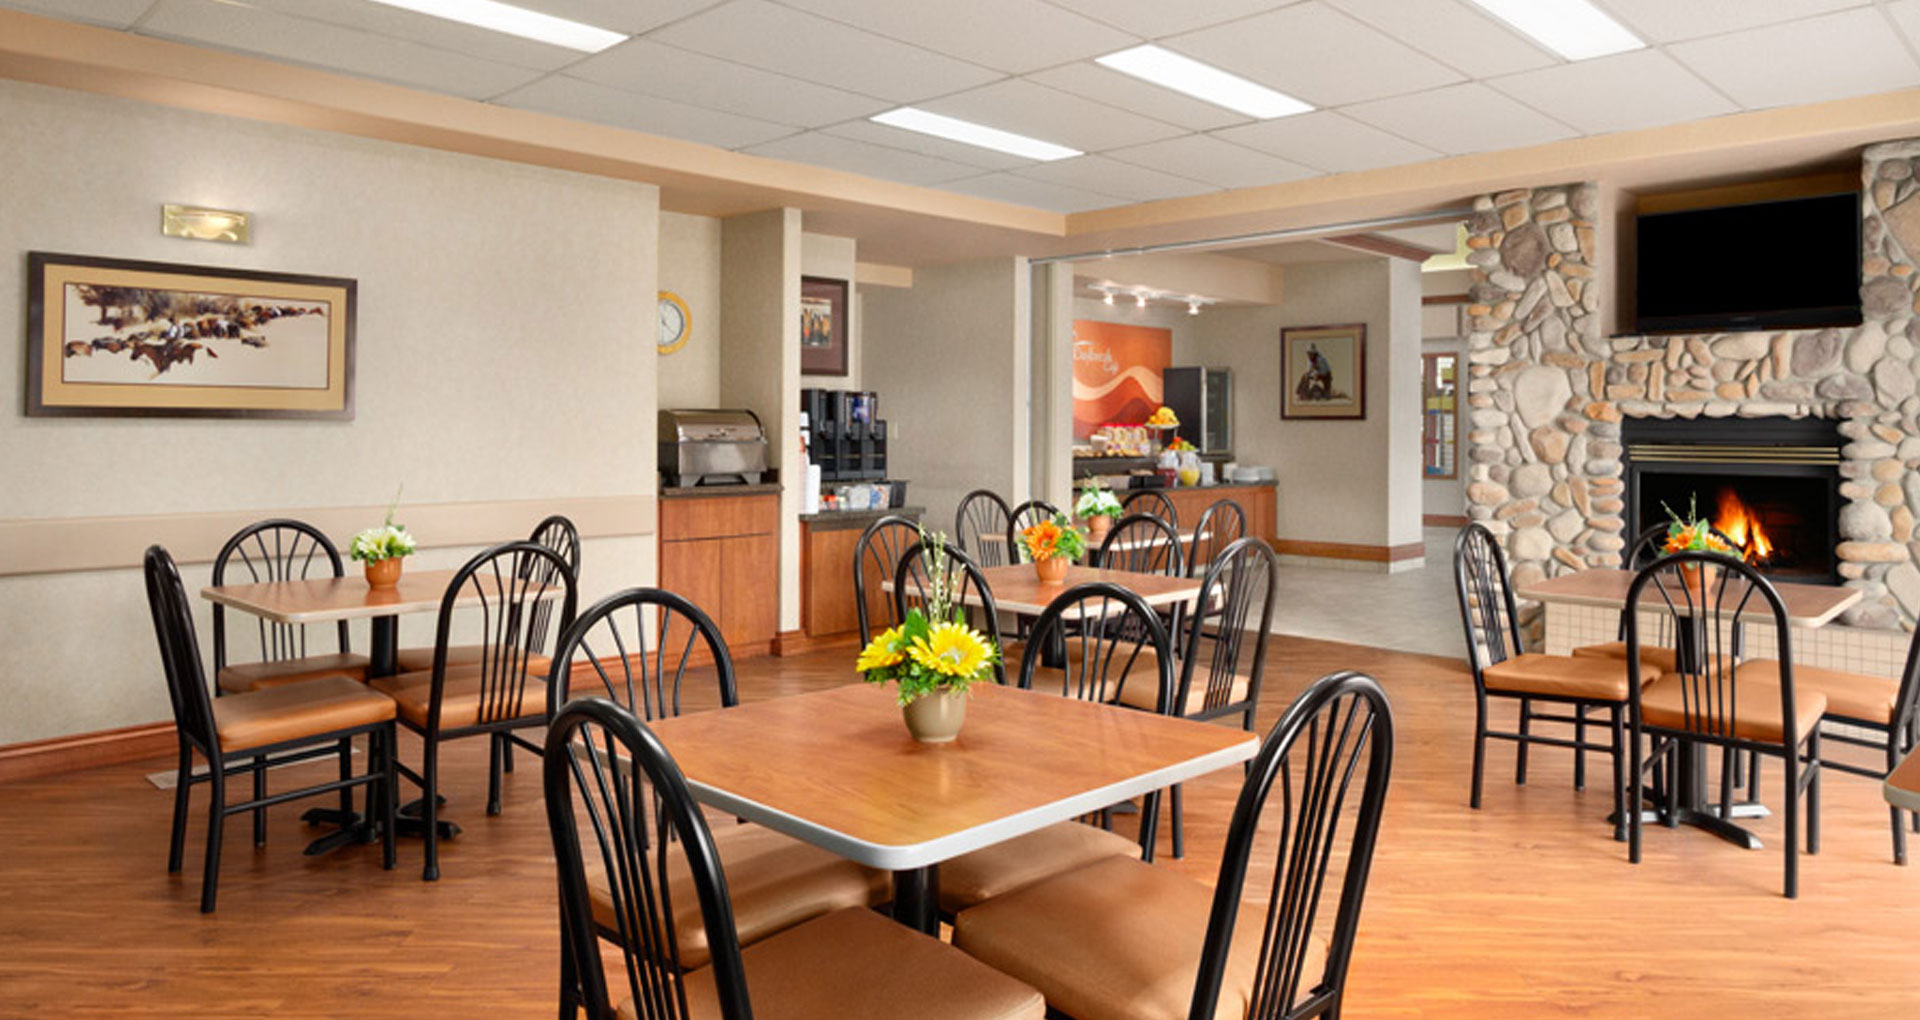 Large panoramic view of the Daybreak Café at Days Inn Red Deer with square eating tables and comfortable chairs are placed around a lit fireplace.
.
